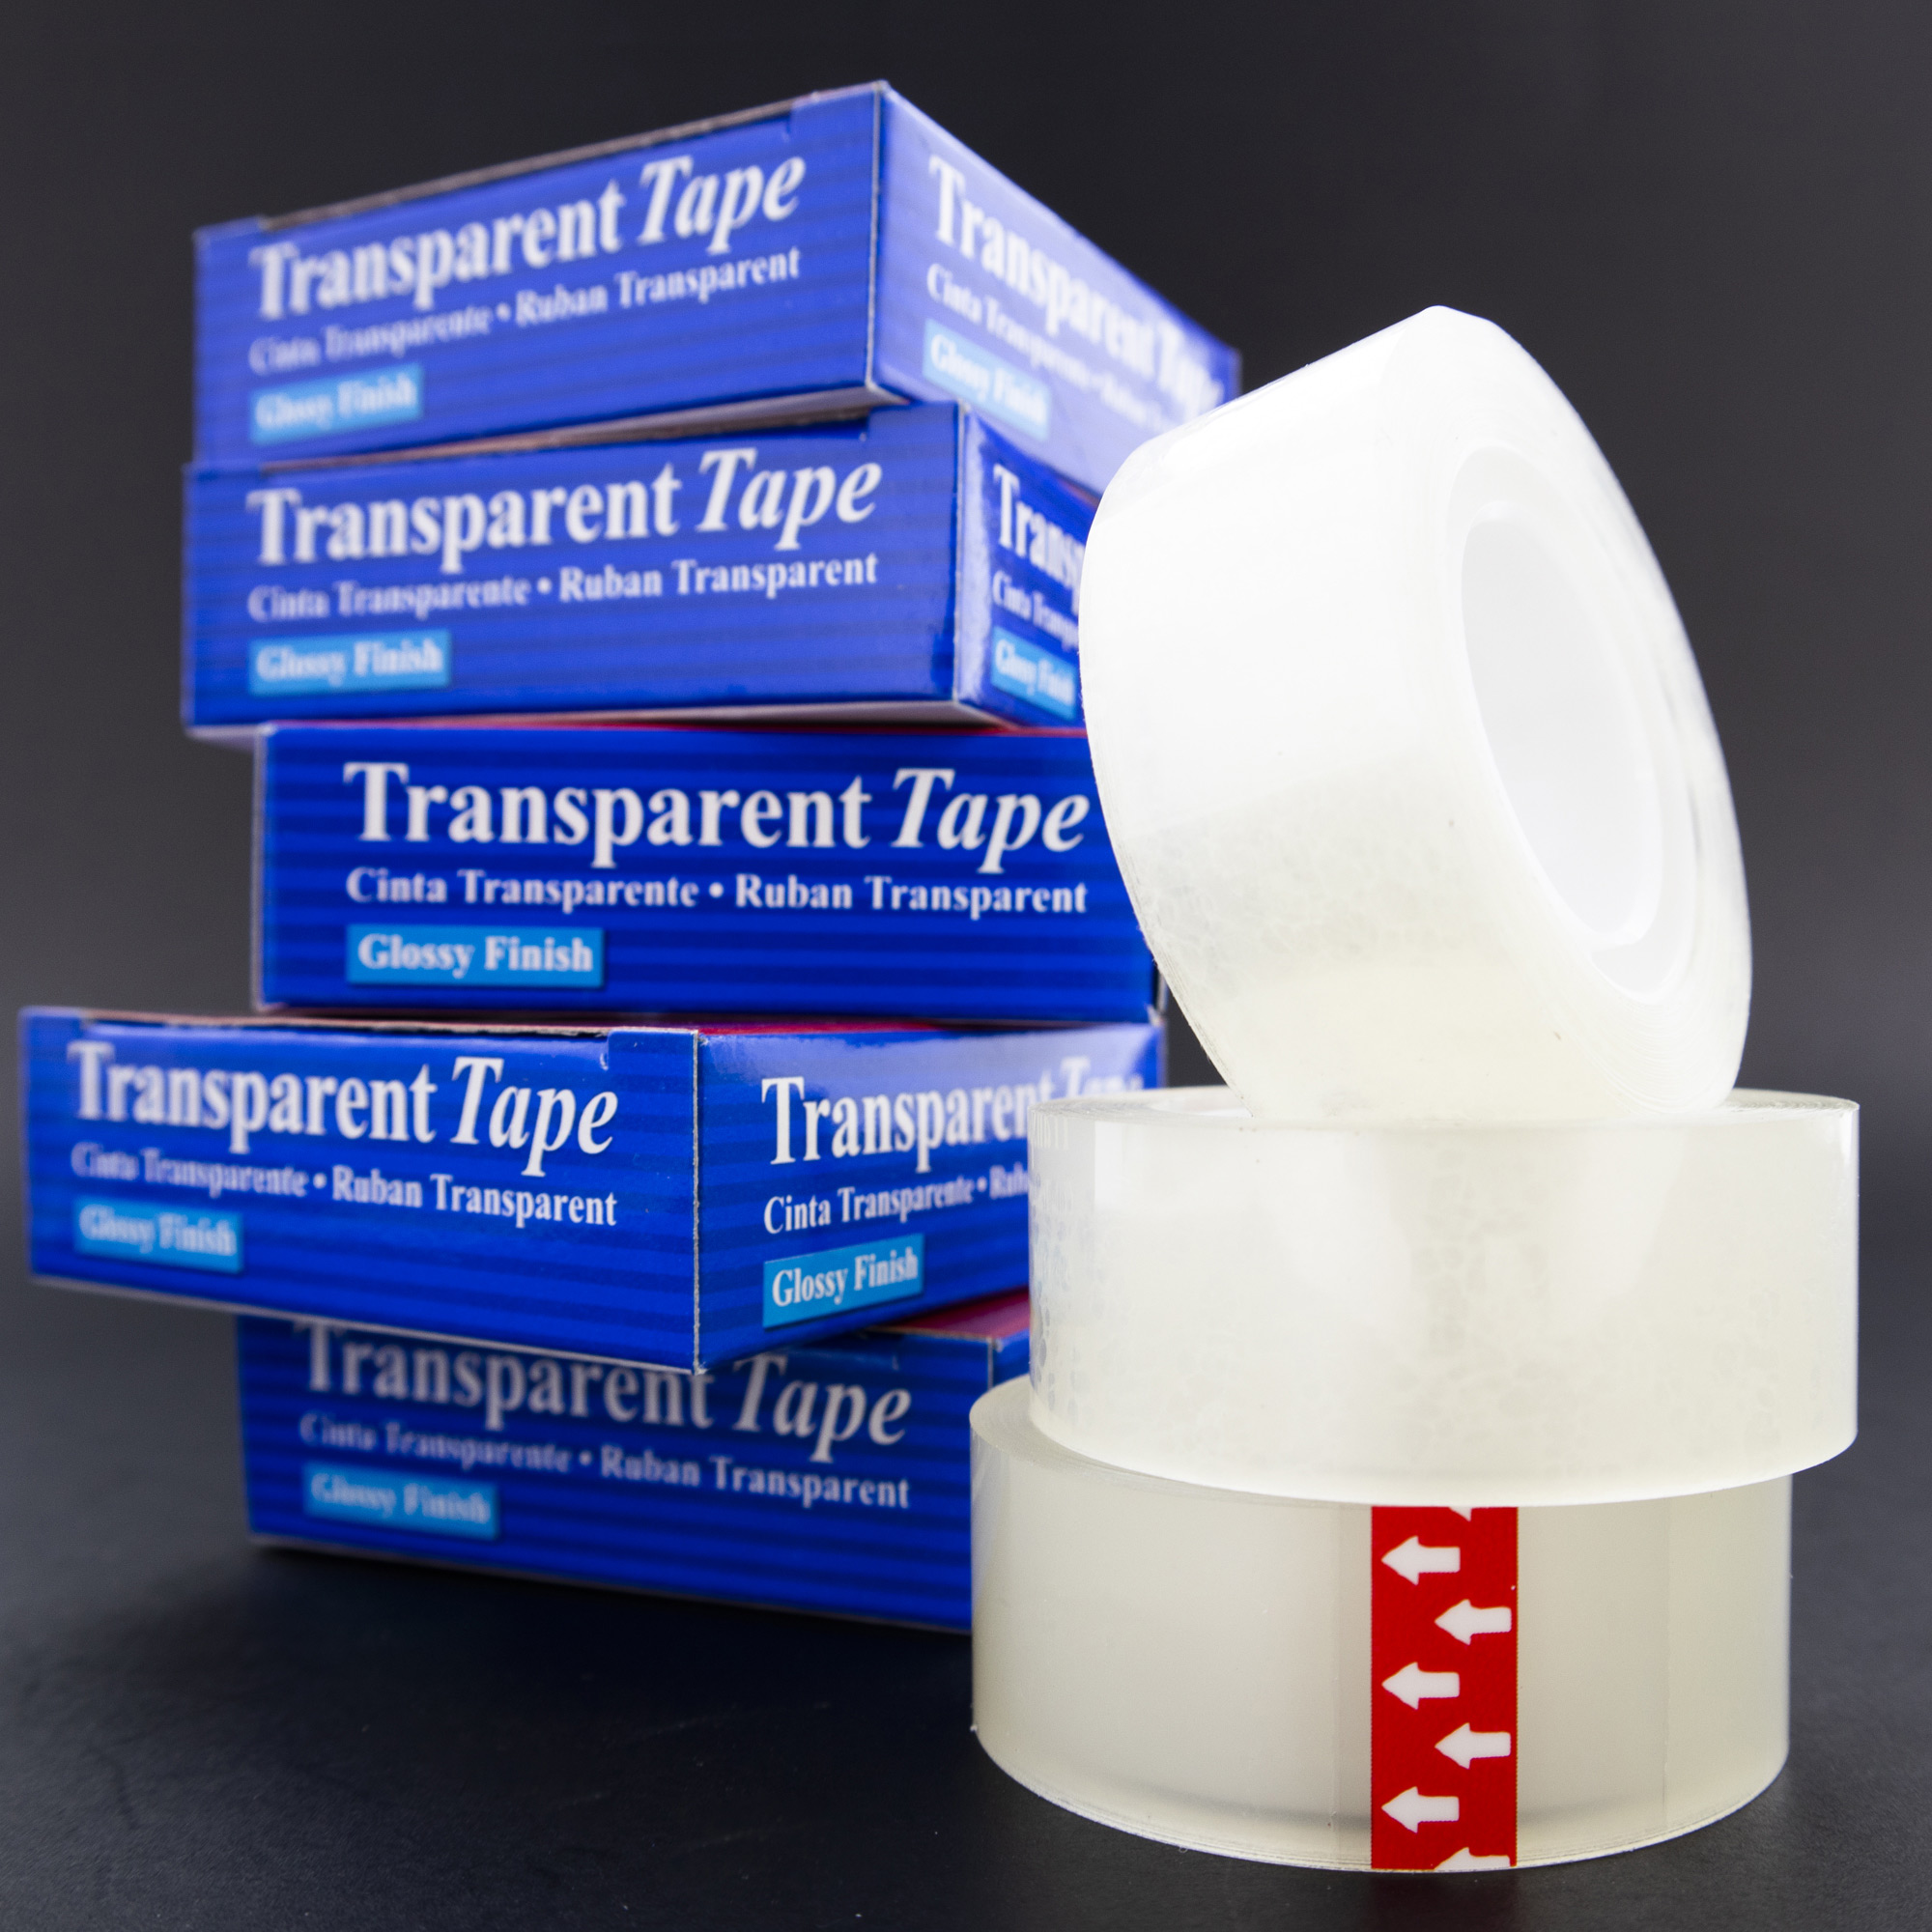 Scotch Transparent Tape Refills , 3/4 x 1296 Inches 1 Roll